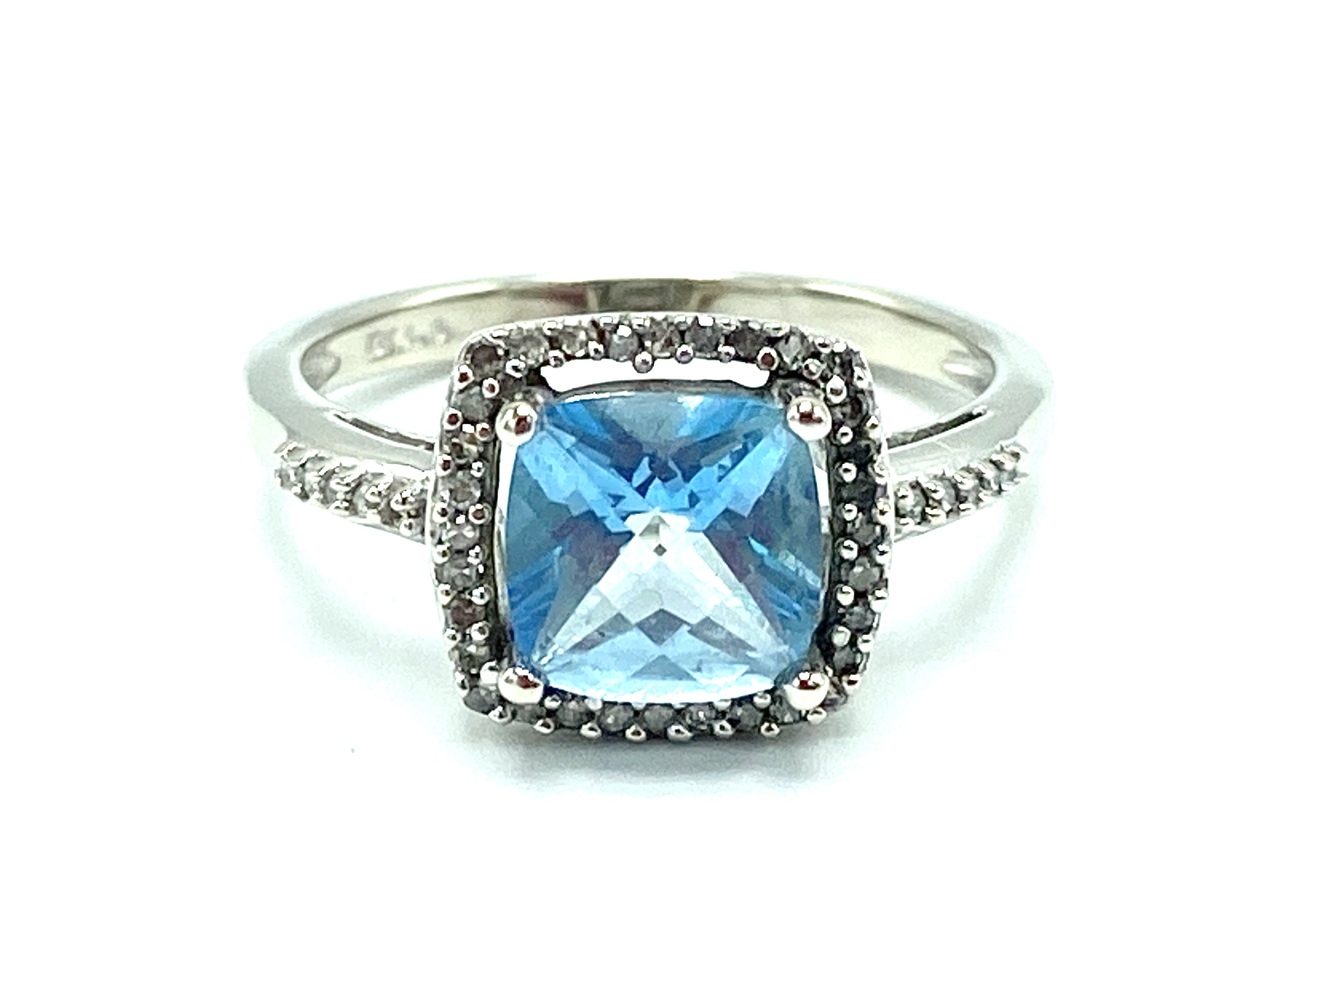 Topaz & Diamond 10KT White Gold Ring | Sterling & Knight Jewelry & Pawn